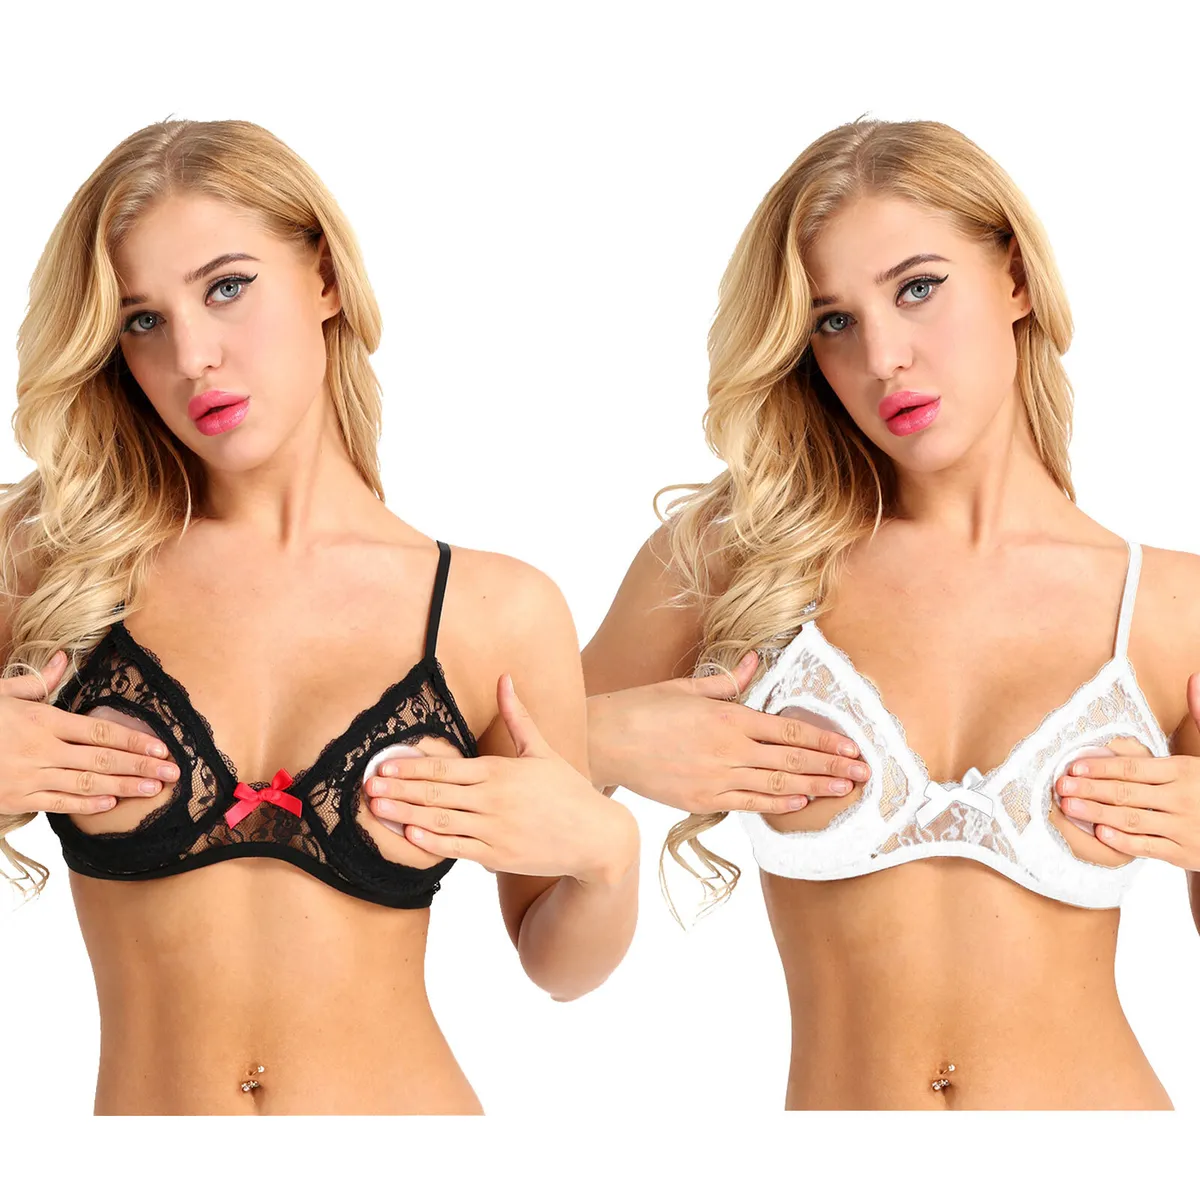 dan frieden recommends best open cup bra for large breasts pic